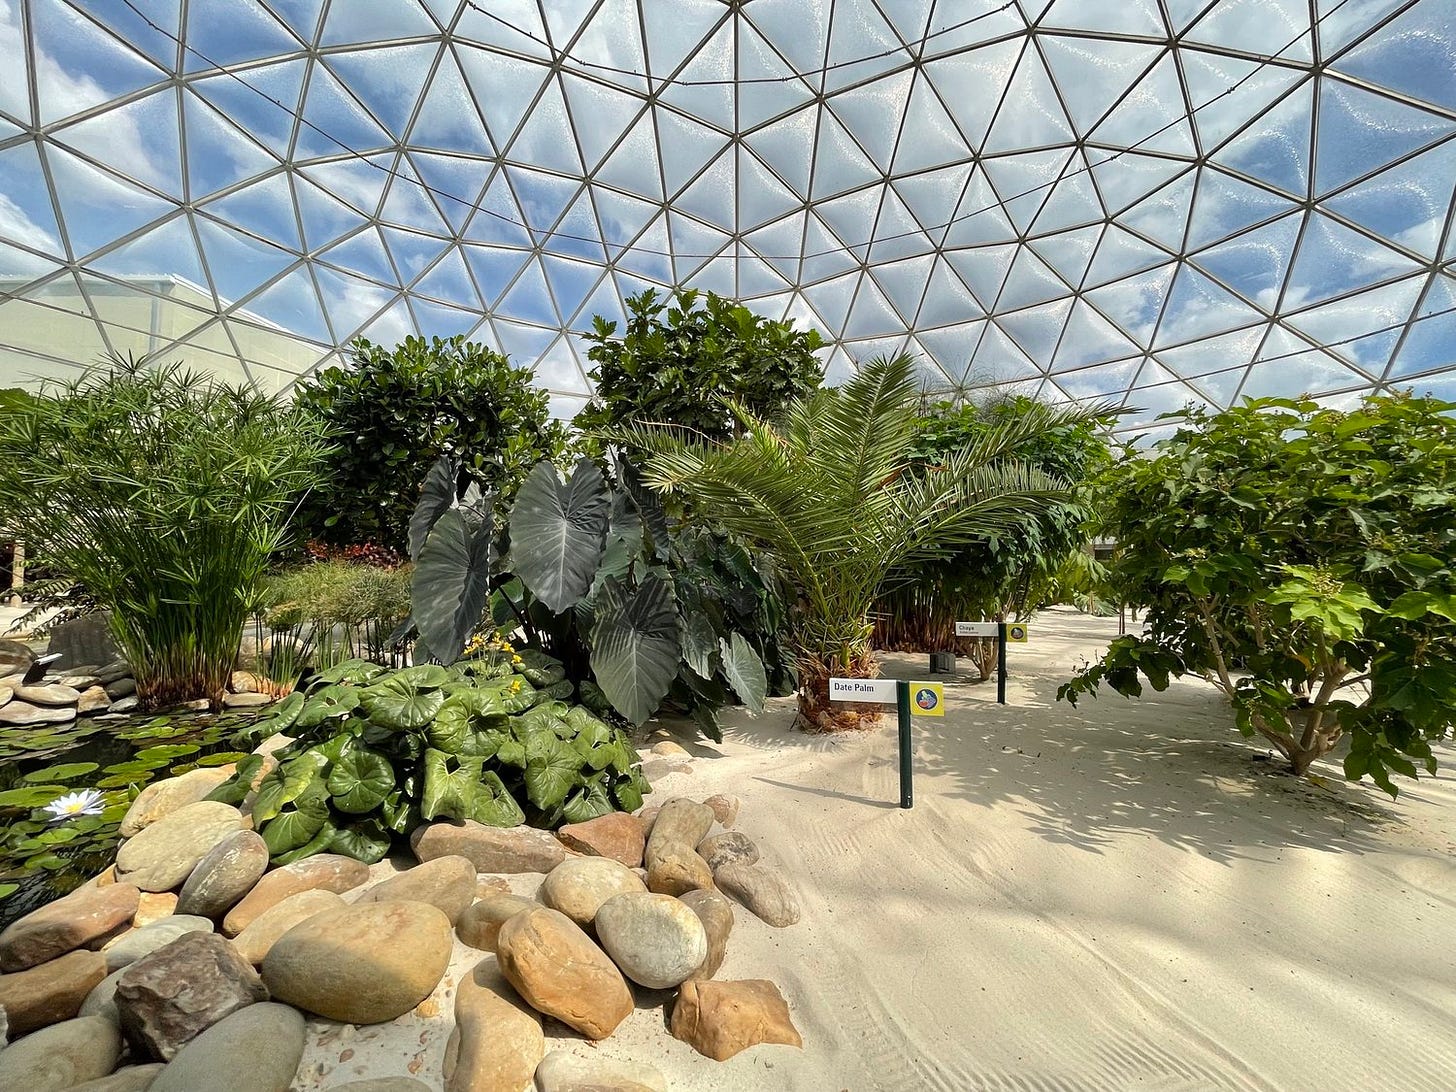 Guide to Living With The Land at EPCOT